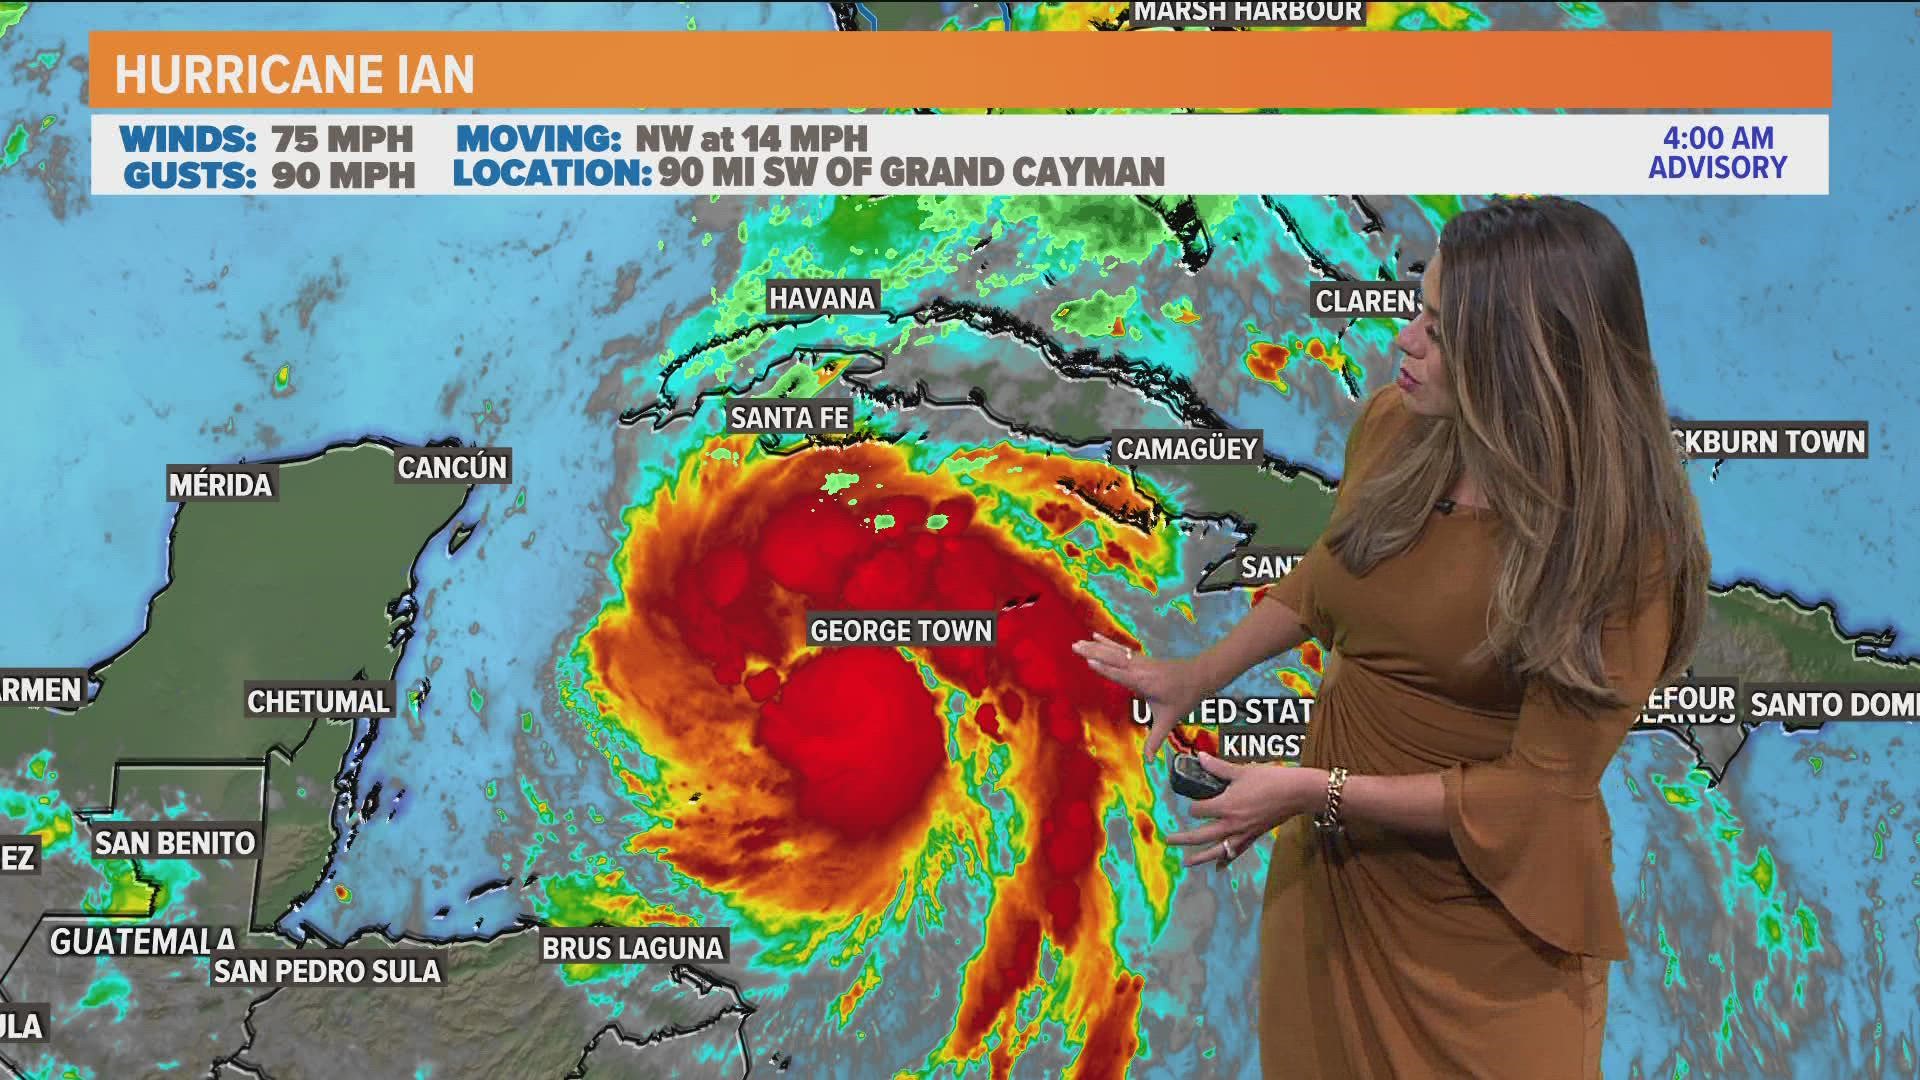 The hurricane is heading to Cuba now & it's expected to reach Florida later this week.